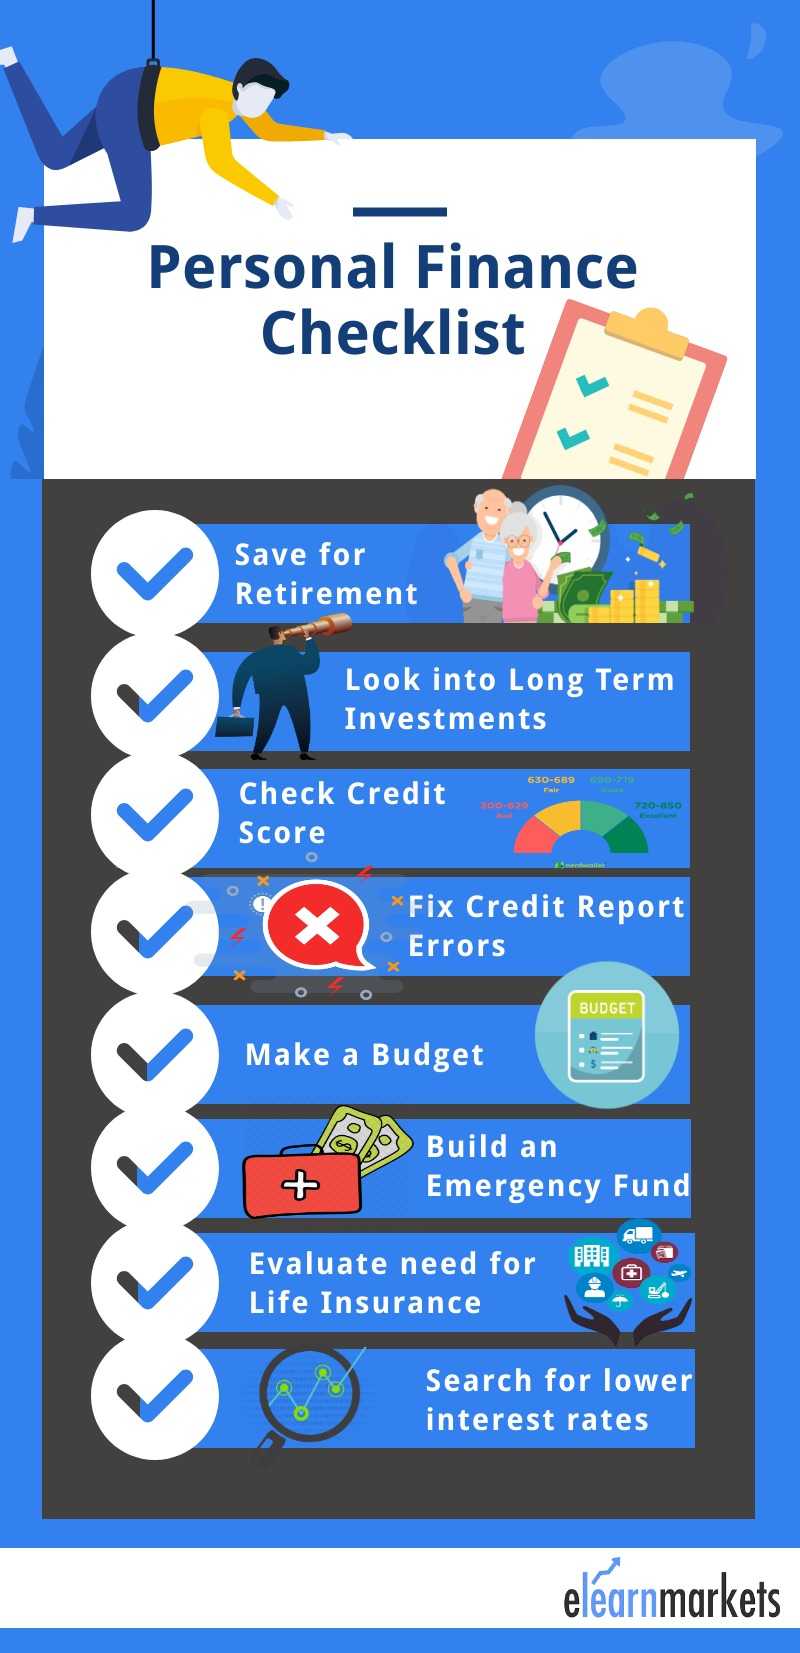 Personal Finance Checklist: 8 Things to do NOW